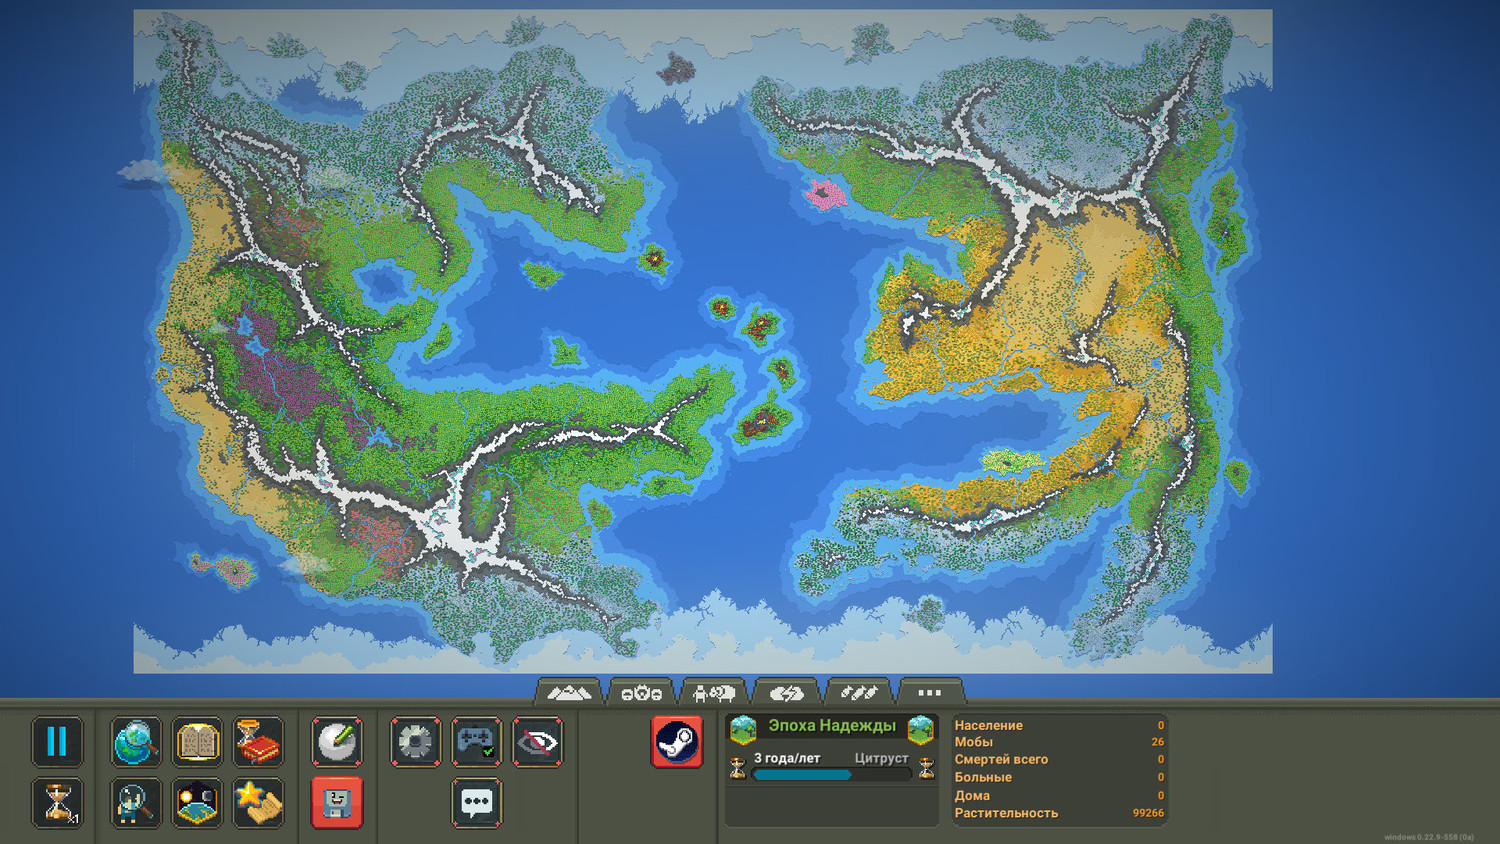 WorldBox - God Simulator: SaveGame (collection of maps from 10 worlds)